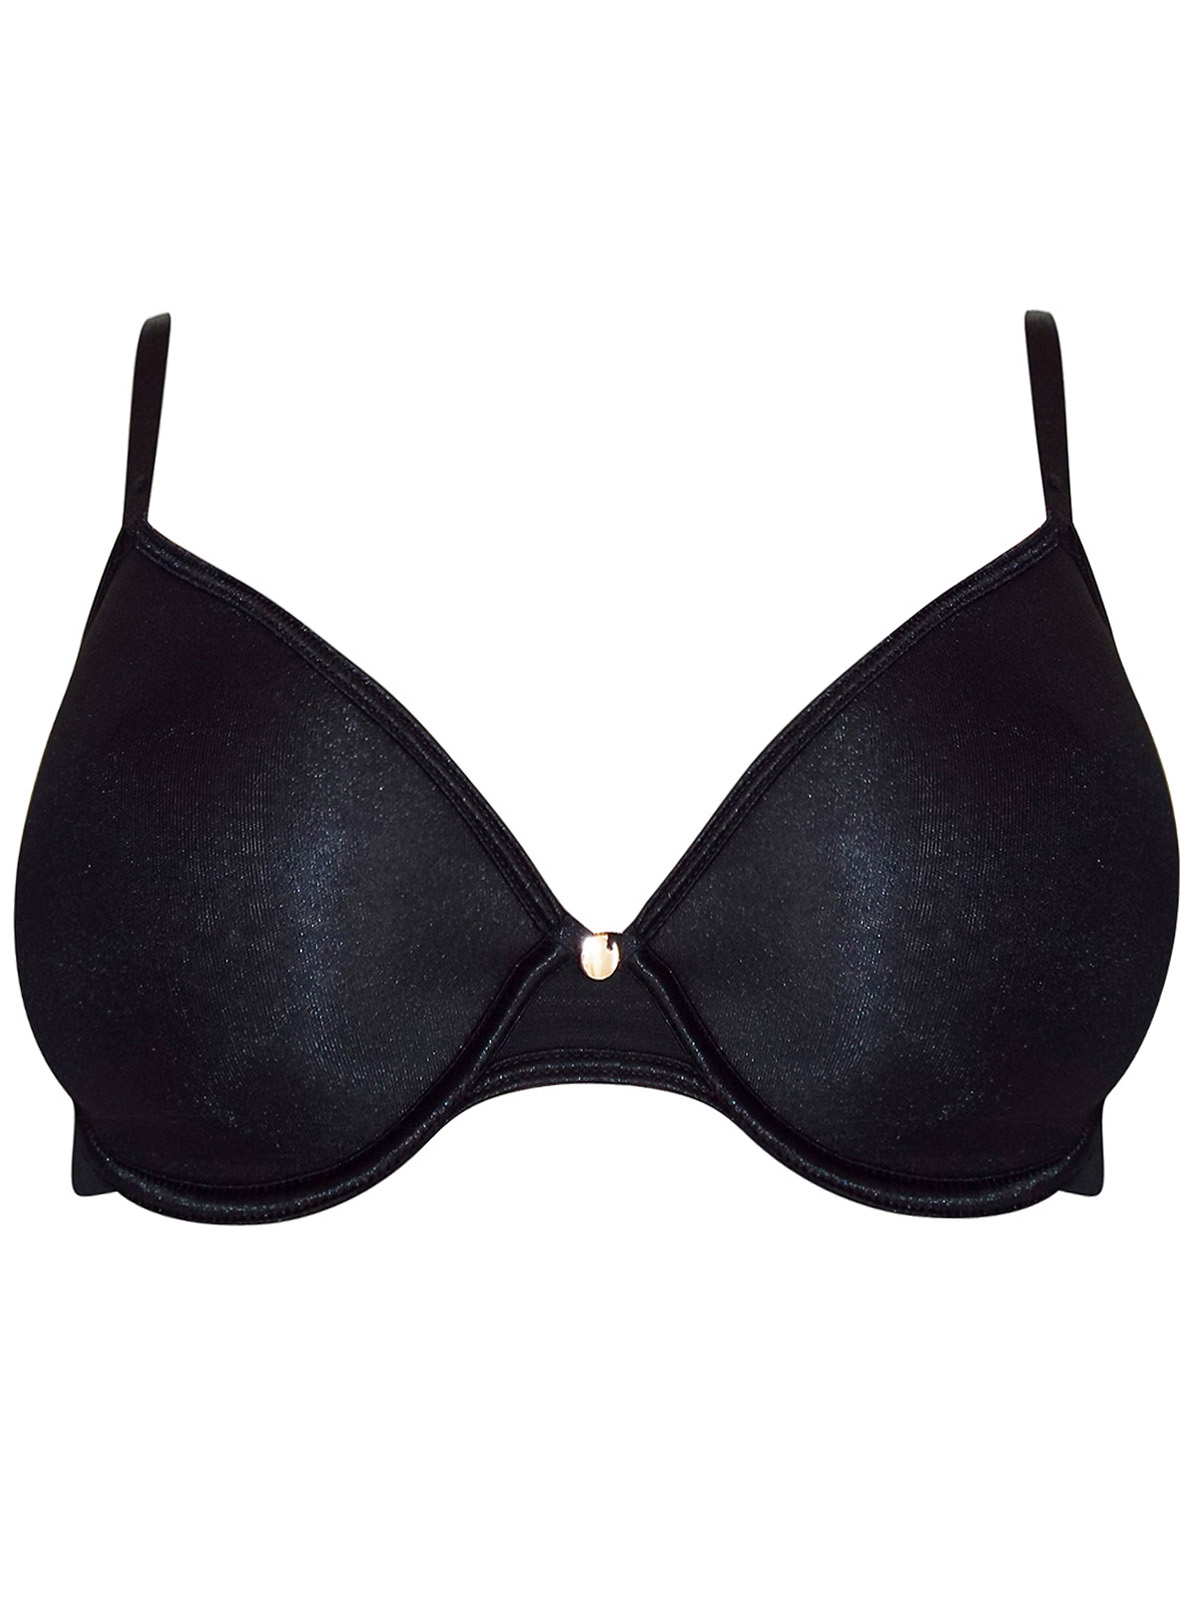 F&F - - F&F BLACK Sheer Underwired Non-Padded Bra - Size 32 to 38 (B-C-D-DD)